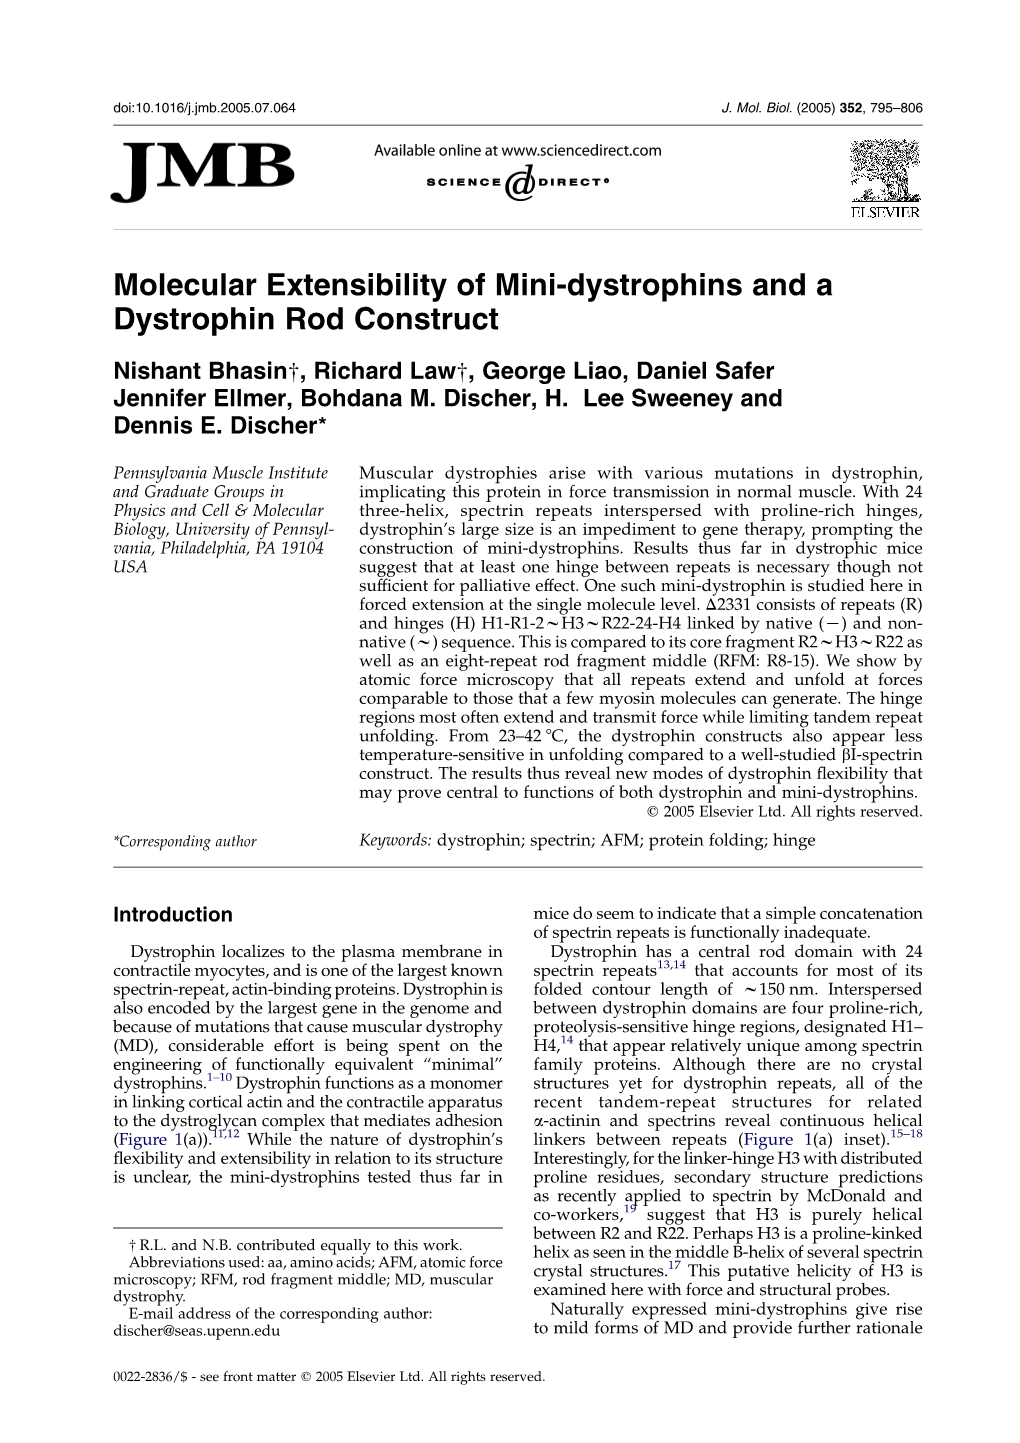 Molecular Extensibility of Mini-Dystrophins and a Dystrophin Rod Construct